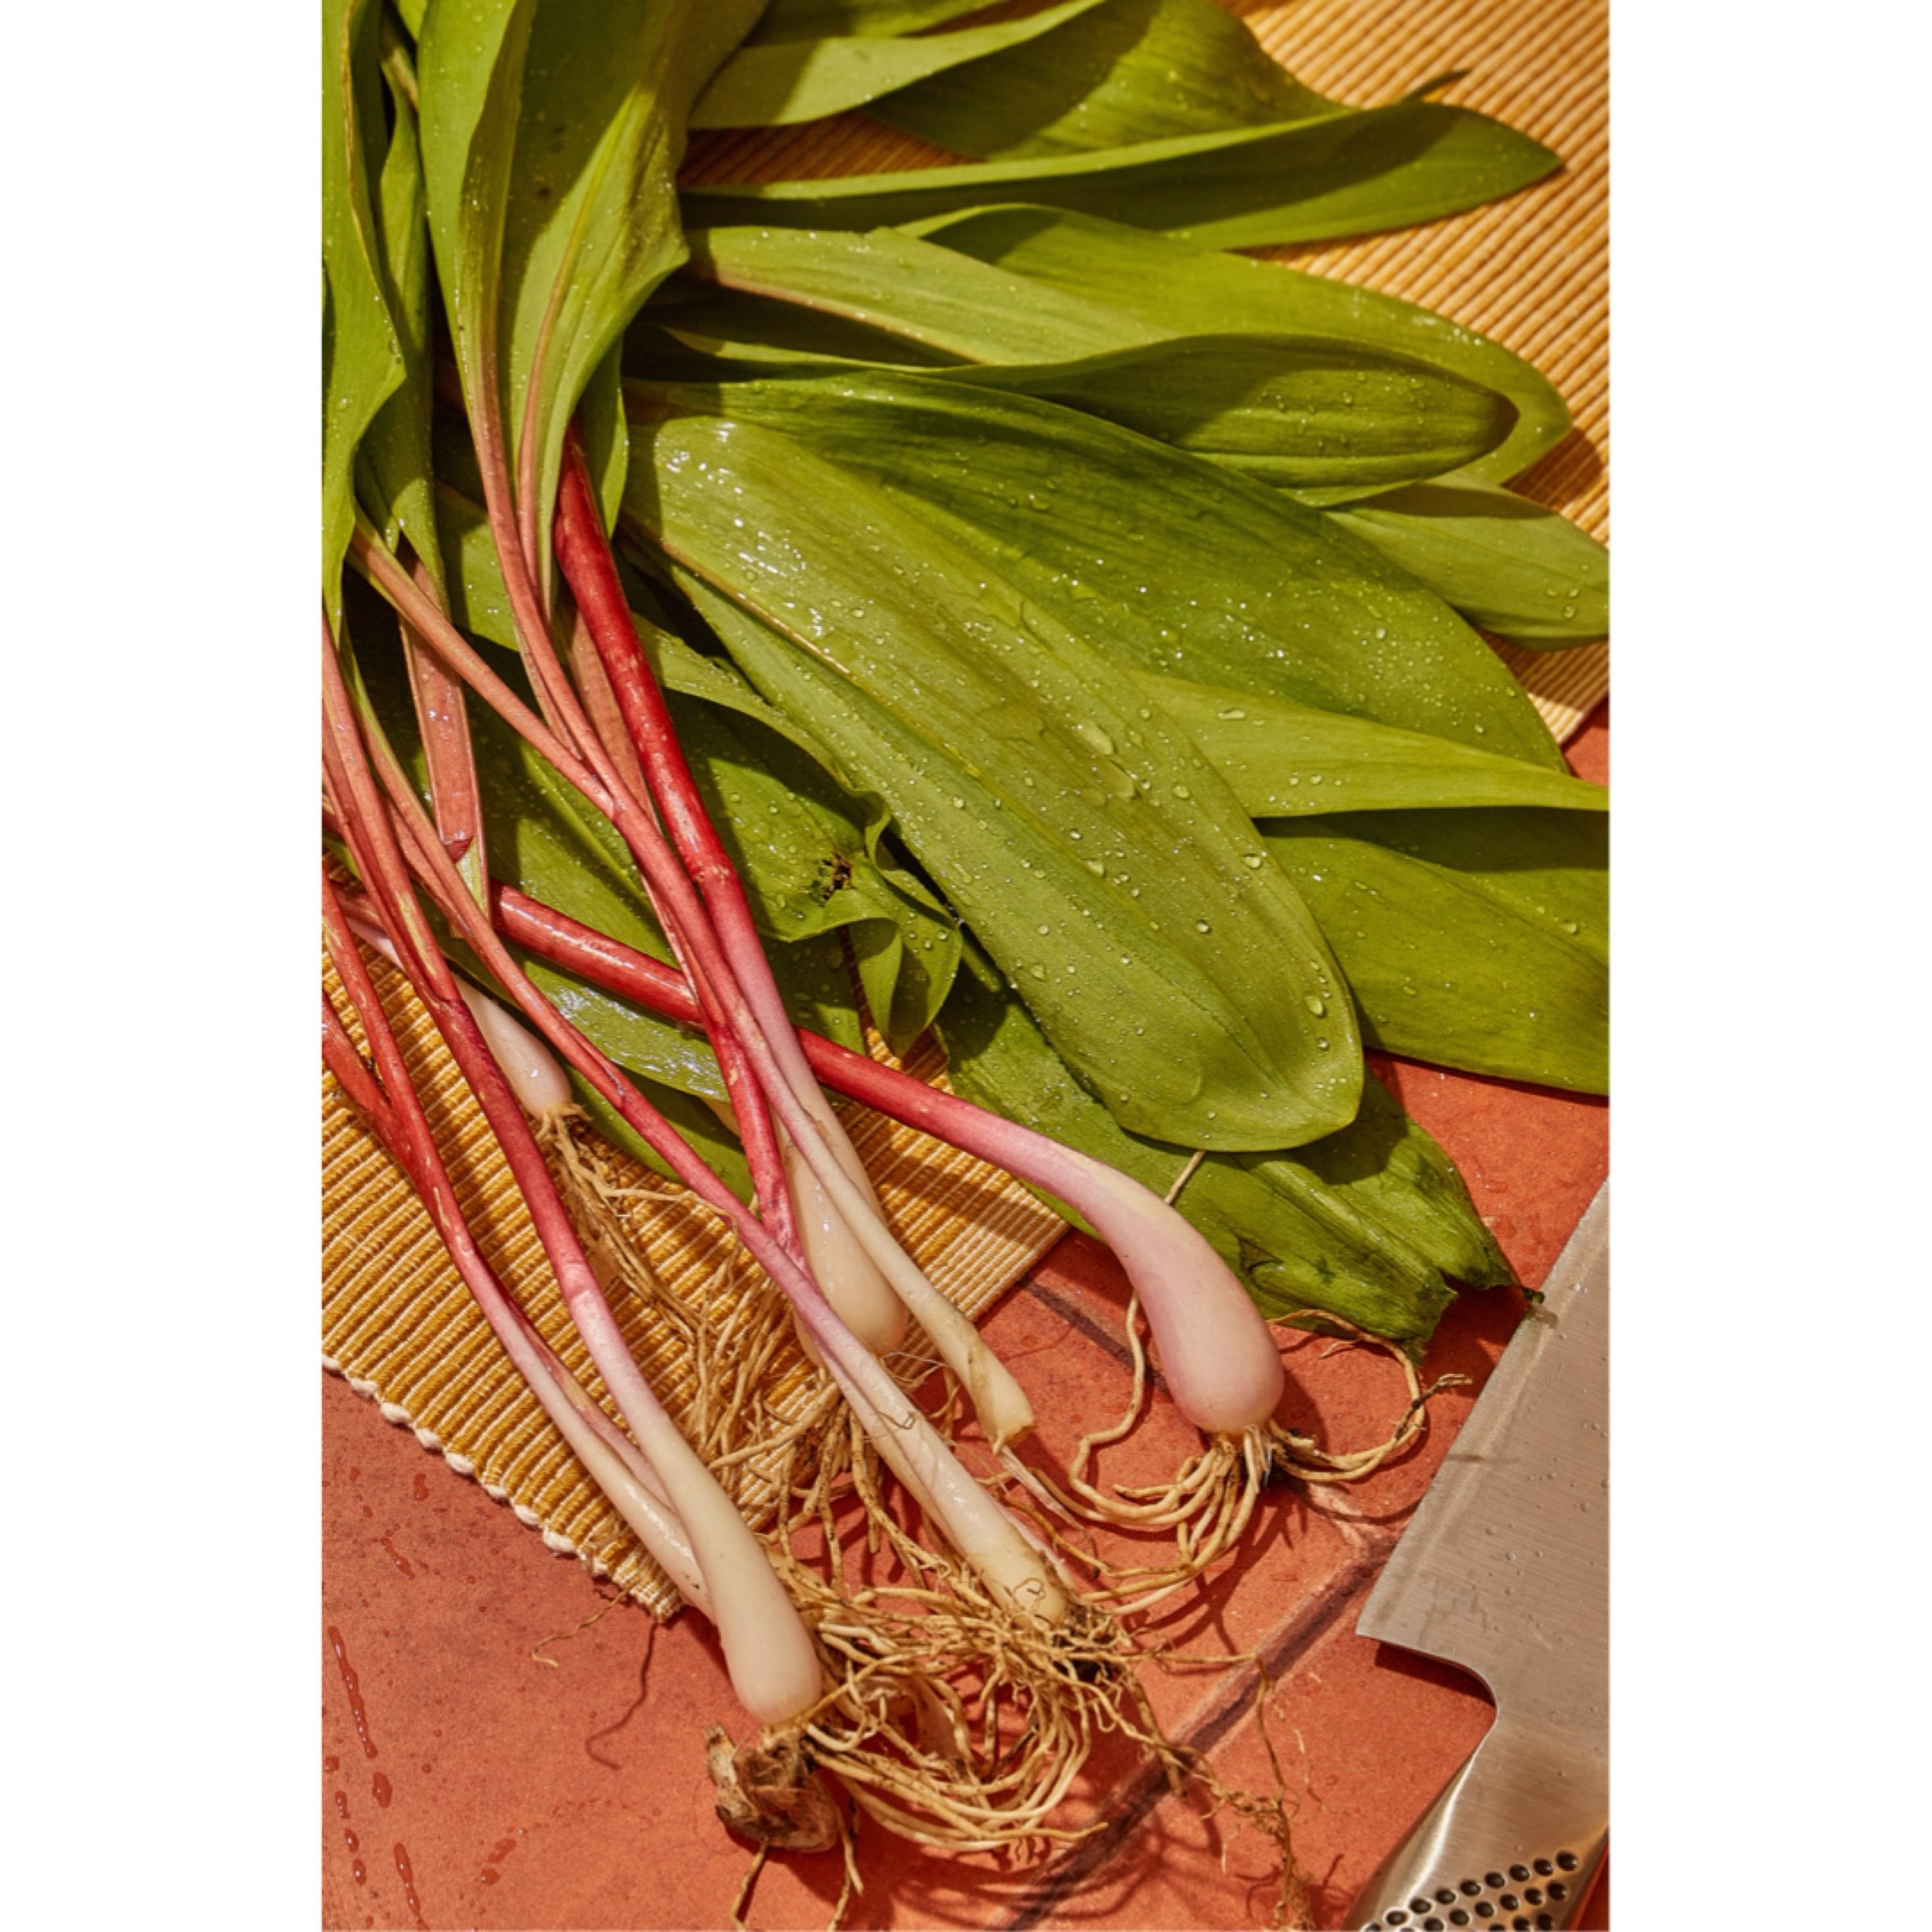 Just in case you haven&rsquo;t heard, it&rsquo;s ramp season in Chicago. This is not a drill! #pageandplate #foodphotographyandstyling #editorialphotography #chicagofoodphotographer #chicagofoodphotographer #chicagofoodstylist